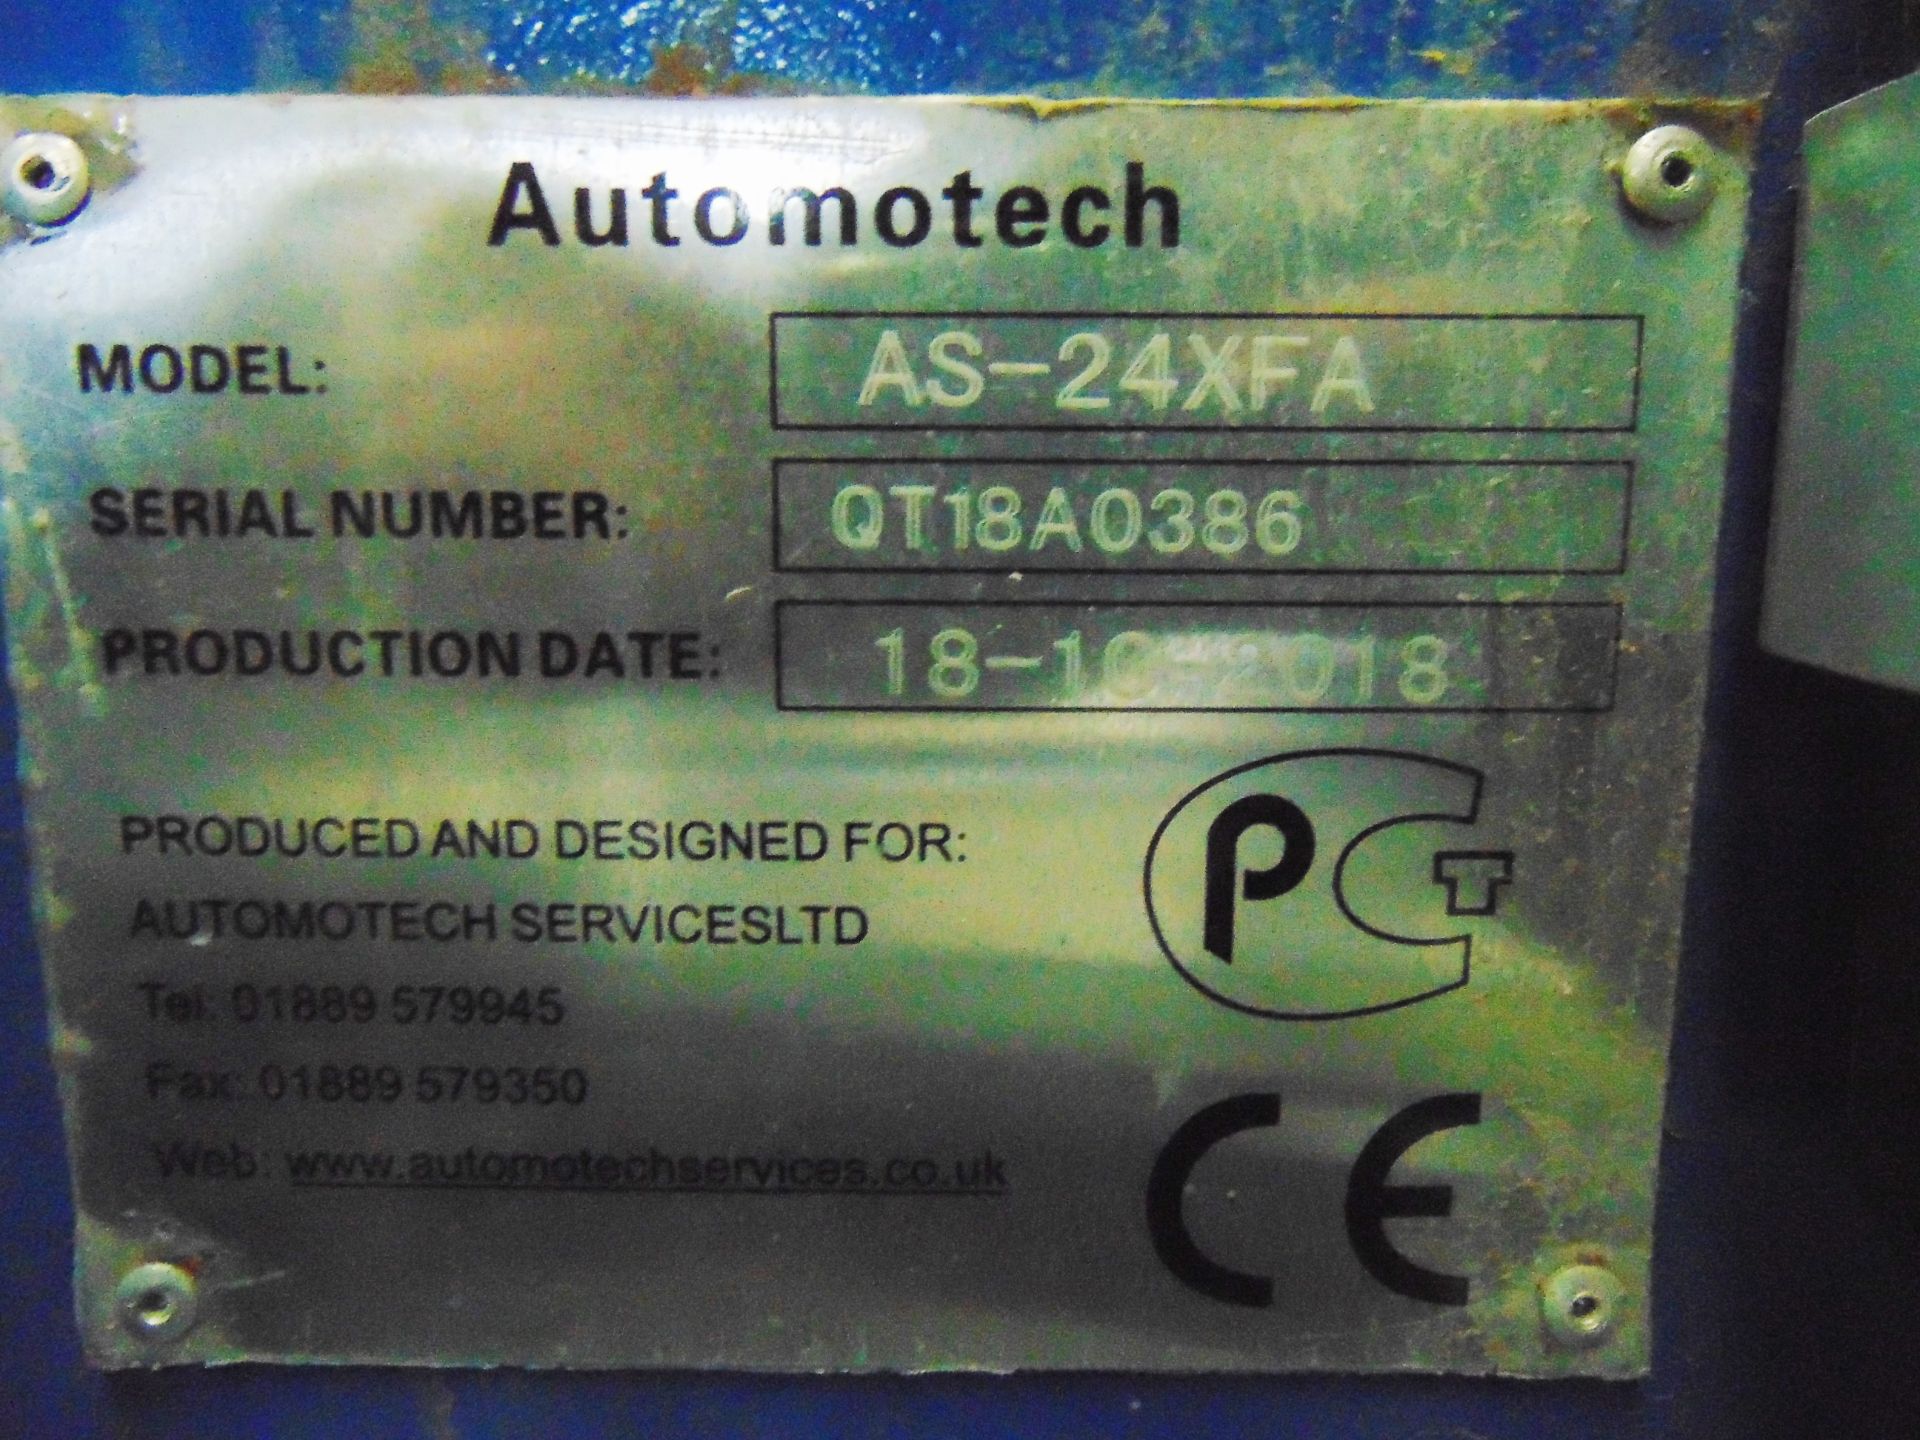 Automotech AS-24XFA Automatic Tyre Changer - Image 12 of 12